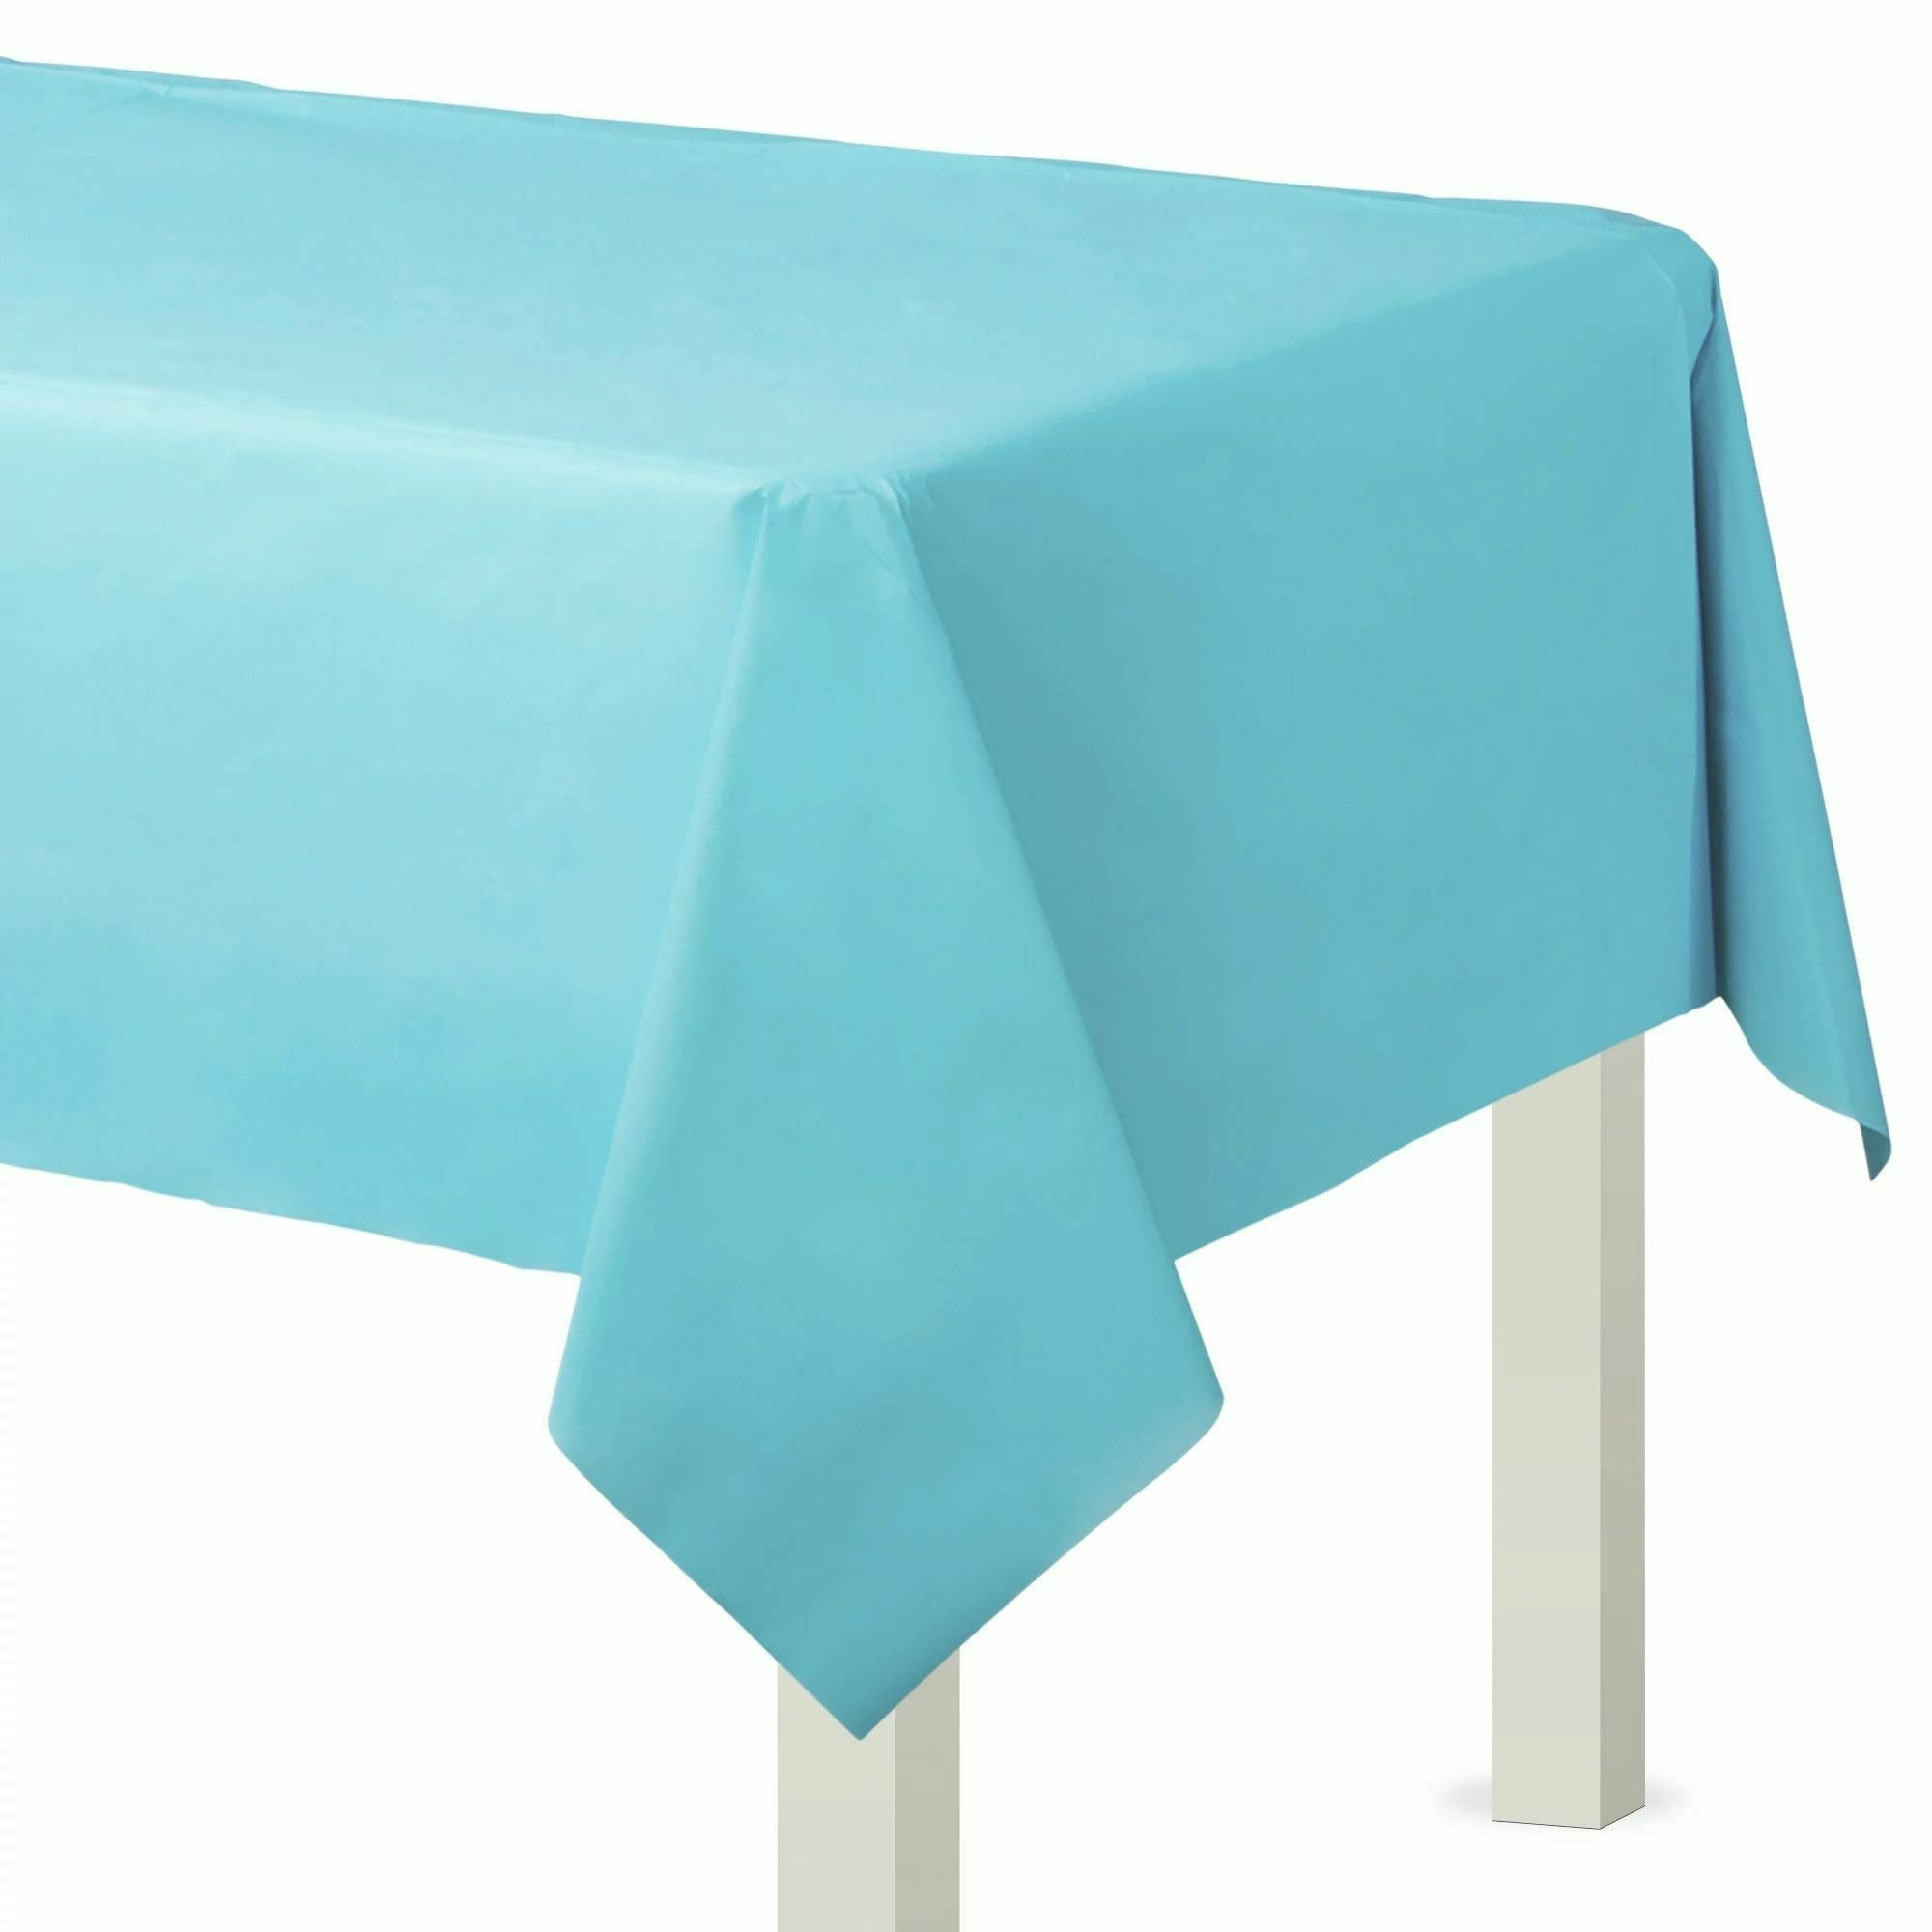 Amscan BASIC Caribbean - Flannel Backed Table Cover